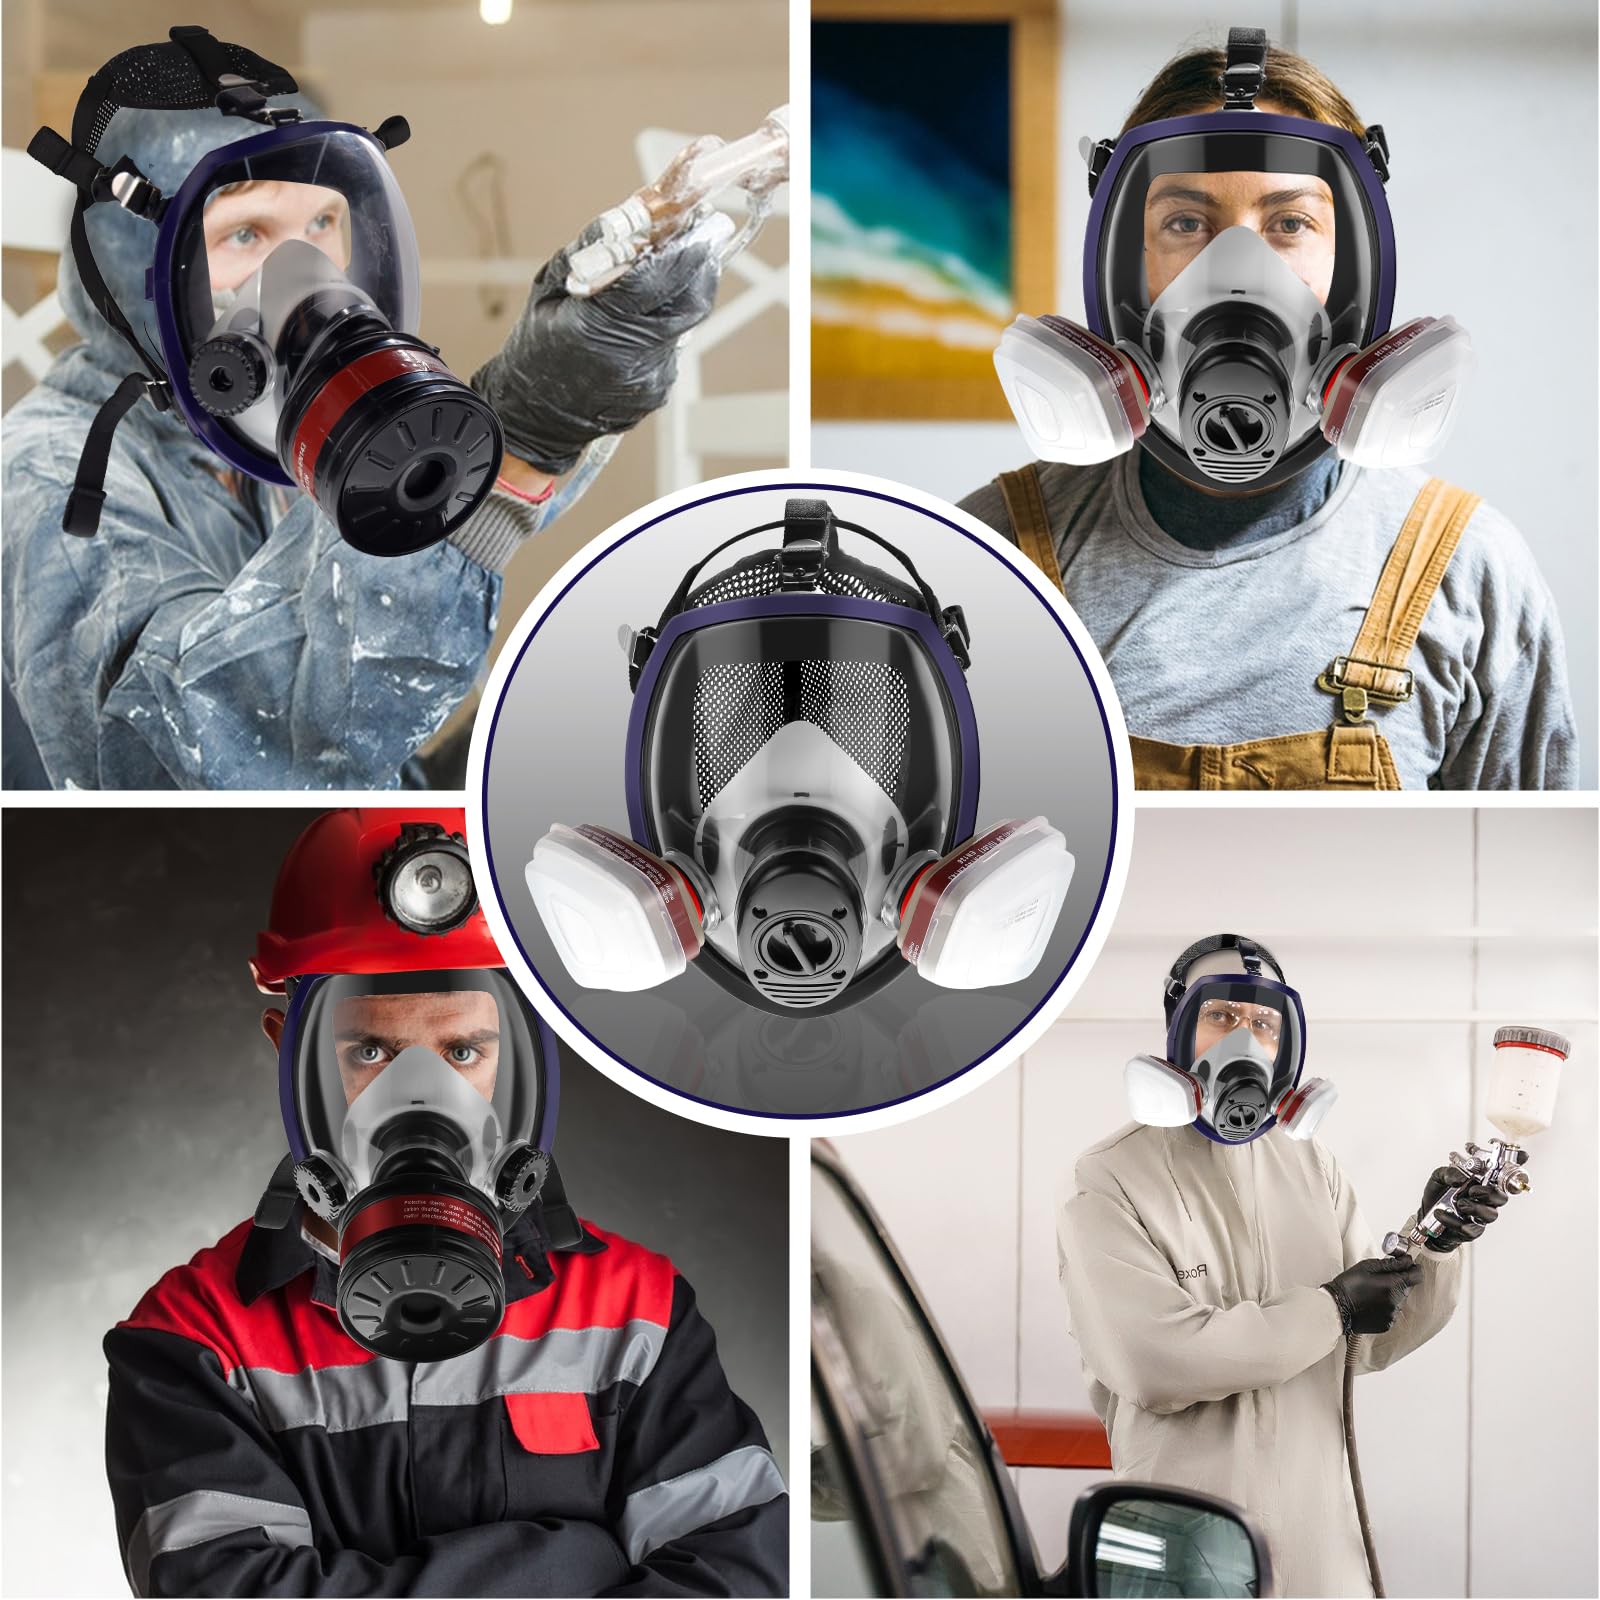 FANGNISN Reusable Full Face Respirator Mask with 40mm Activated Carbon Filter Canister and 6001CN Filter for Organic Vapor, Dust, Fumes, Chemical, Polished, Spraying Painting,Tactical&Survival